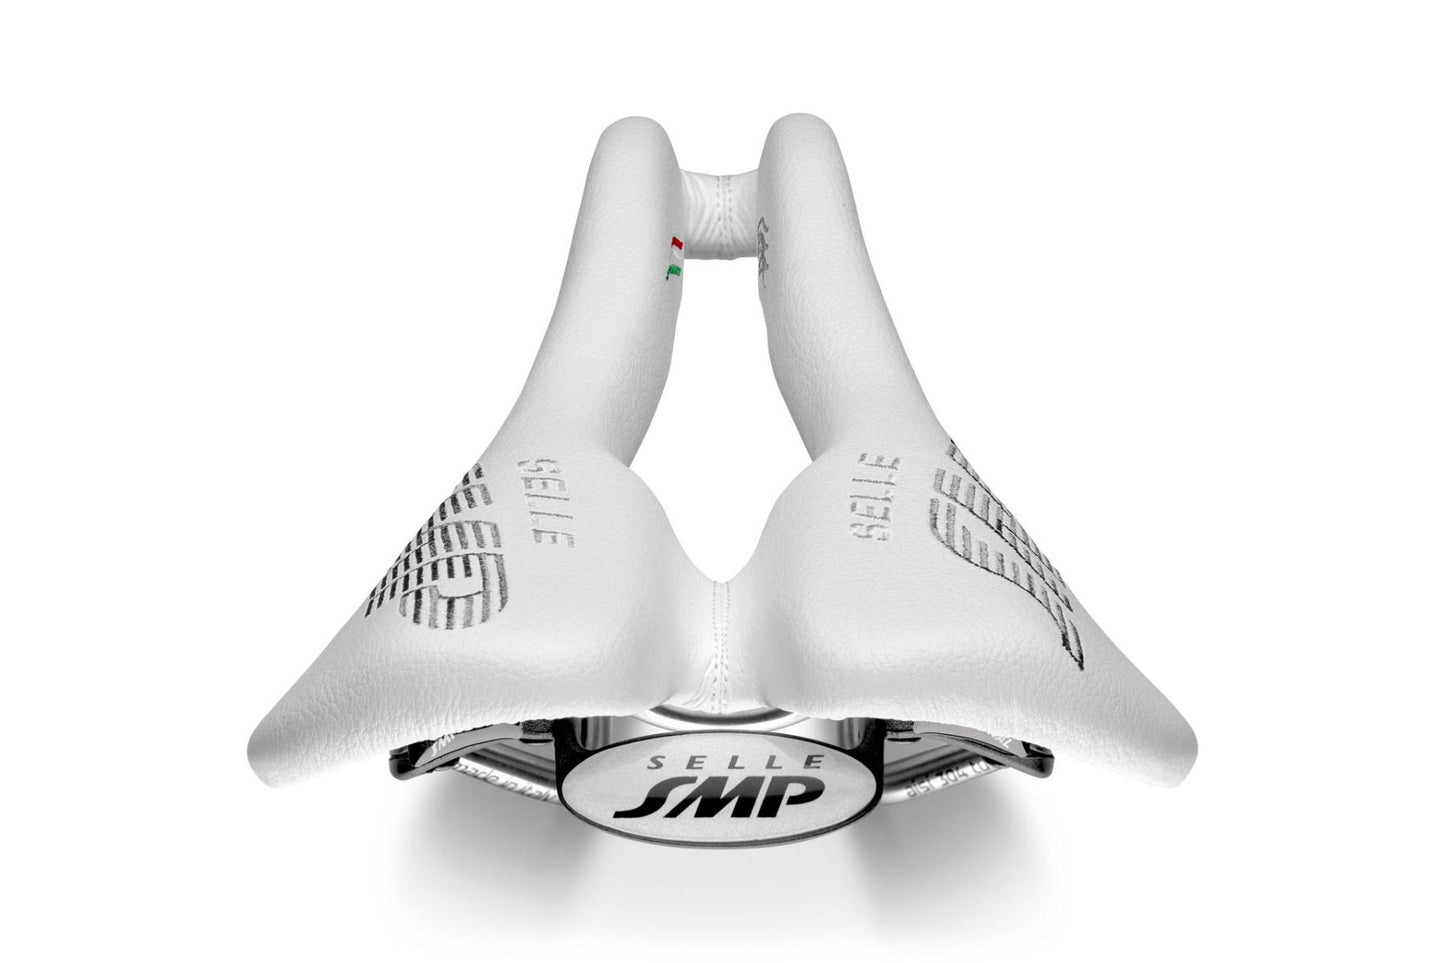 Selle SMP Pro Saddle with Steel Rails (White)